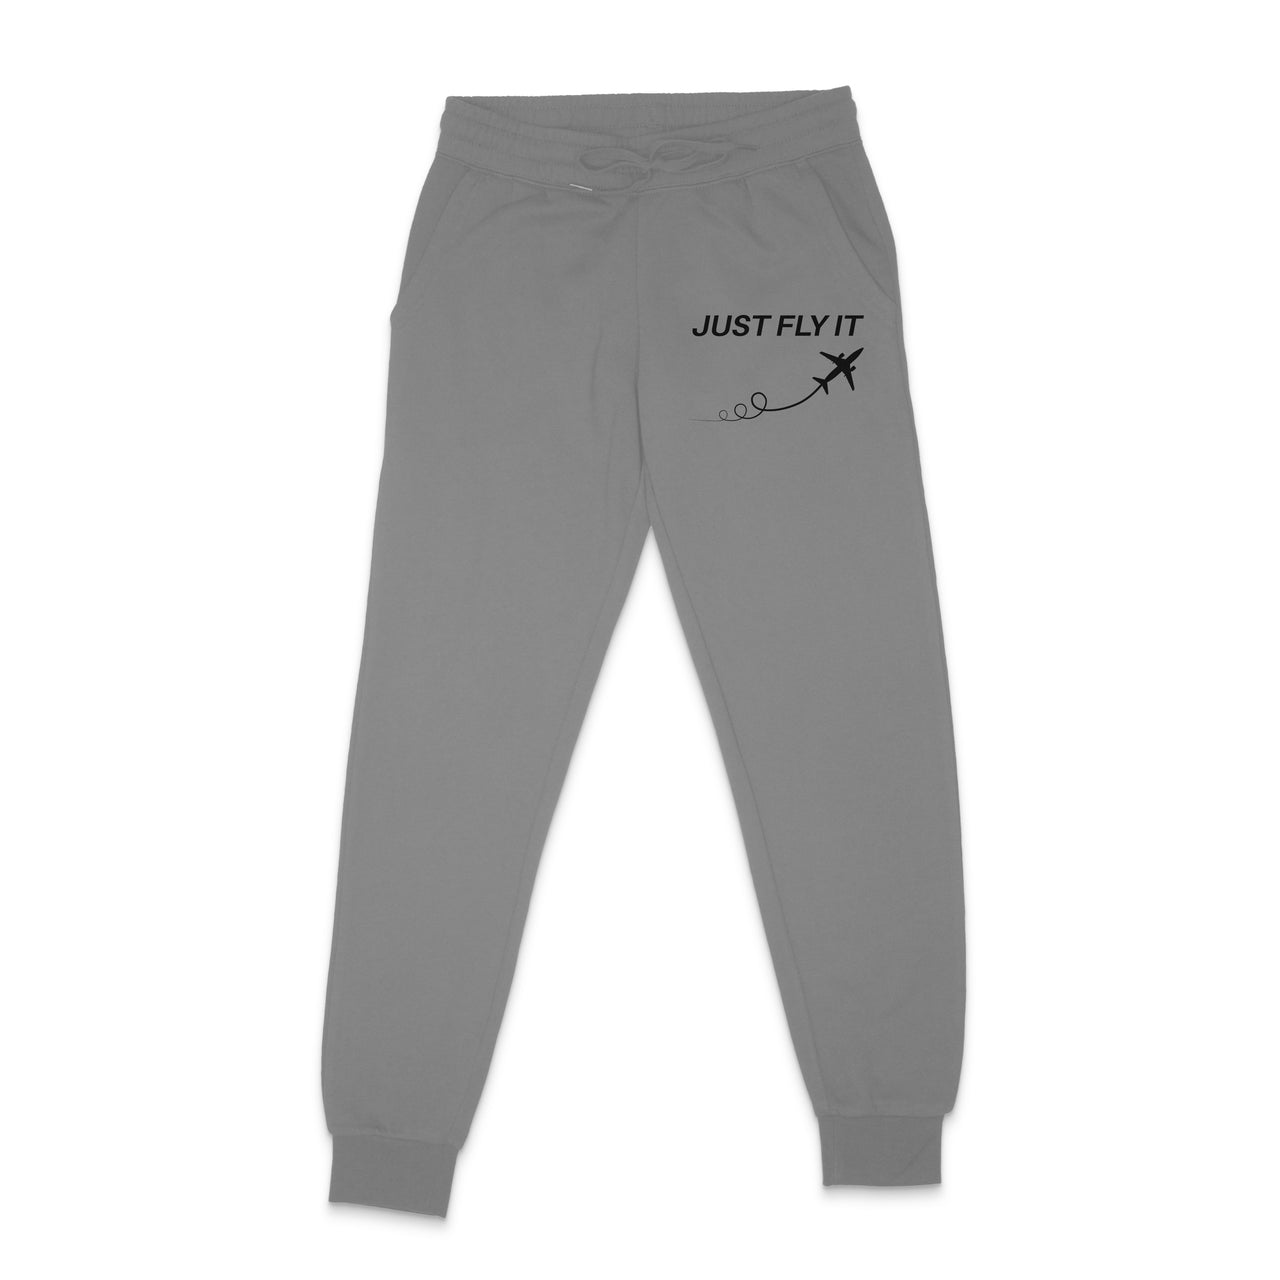 Just Fly It Designed Sweatpants